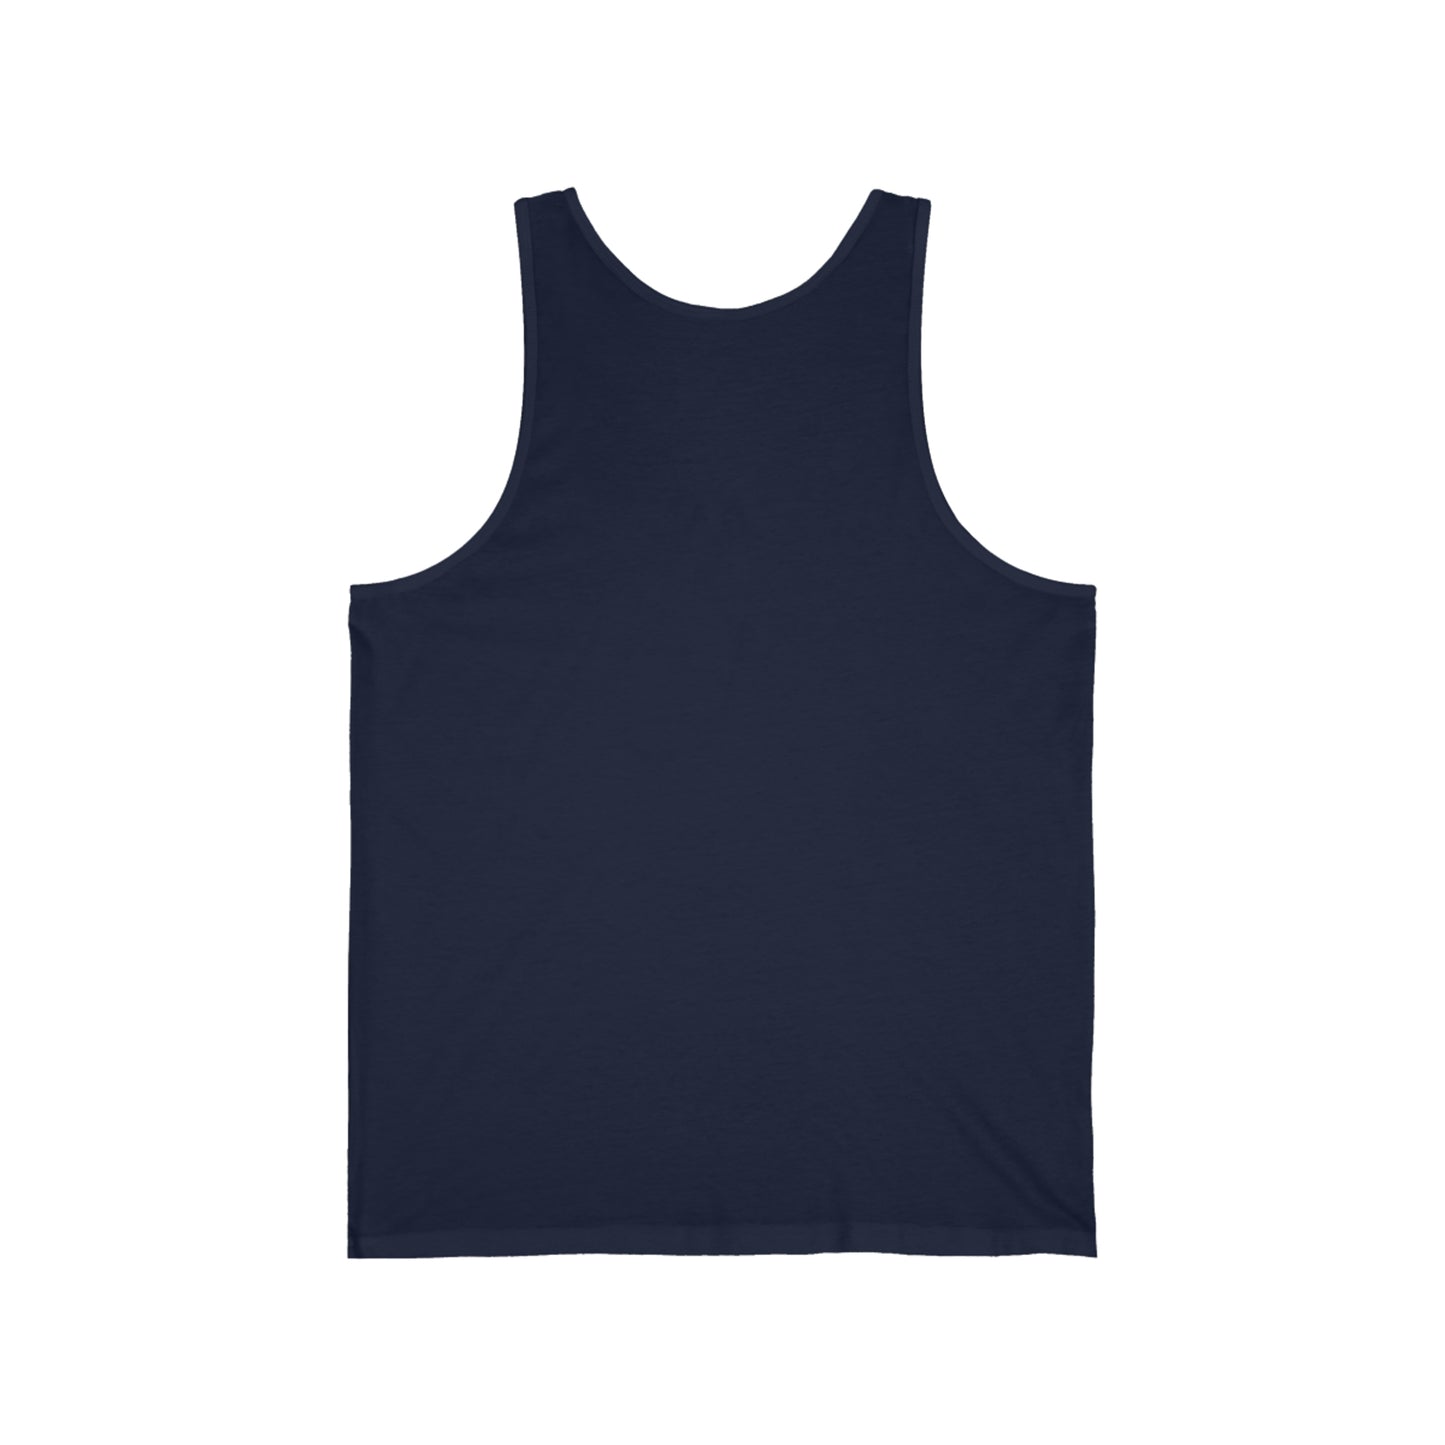 Taiwanese Roots Design 4: Tank Top